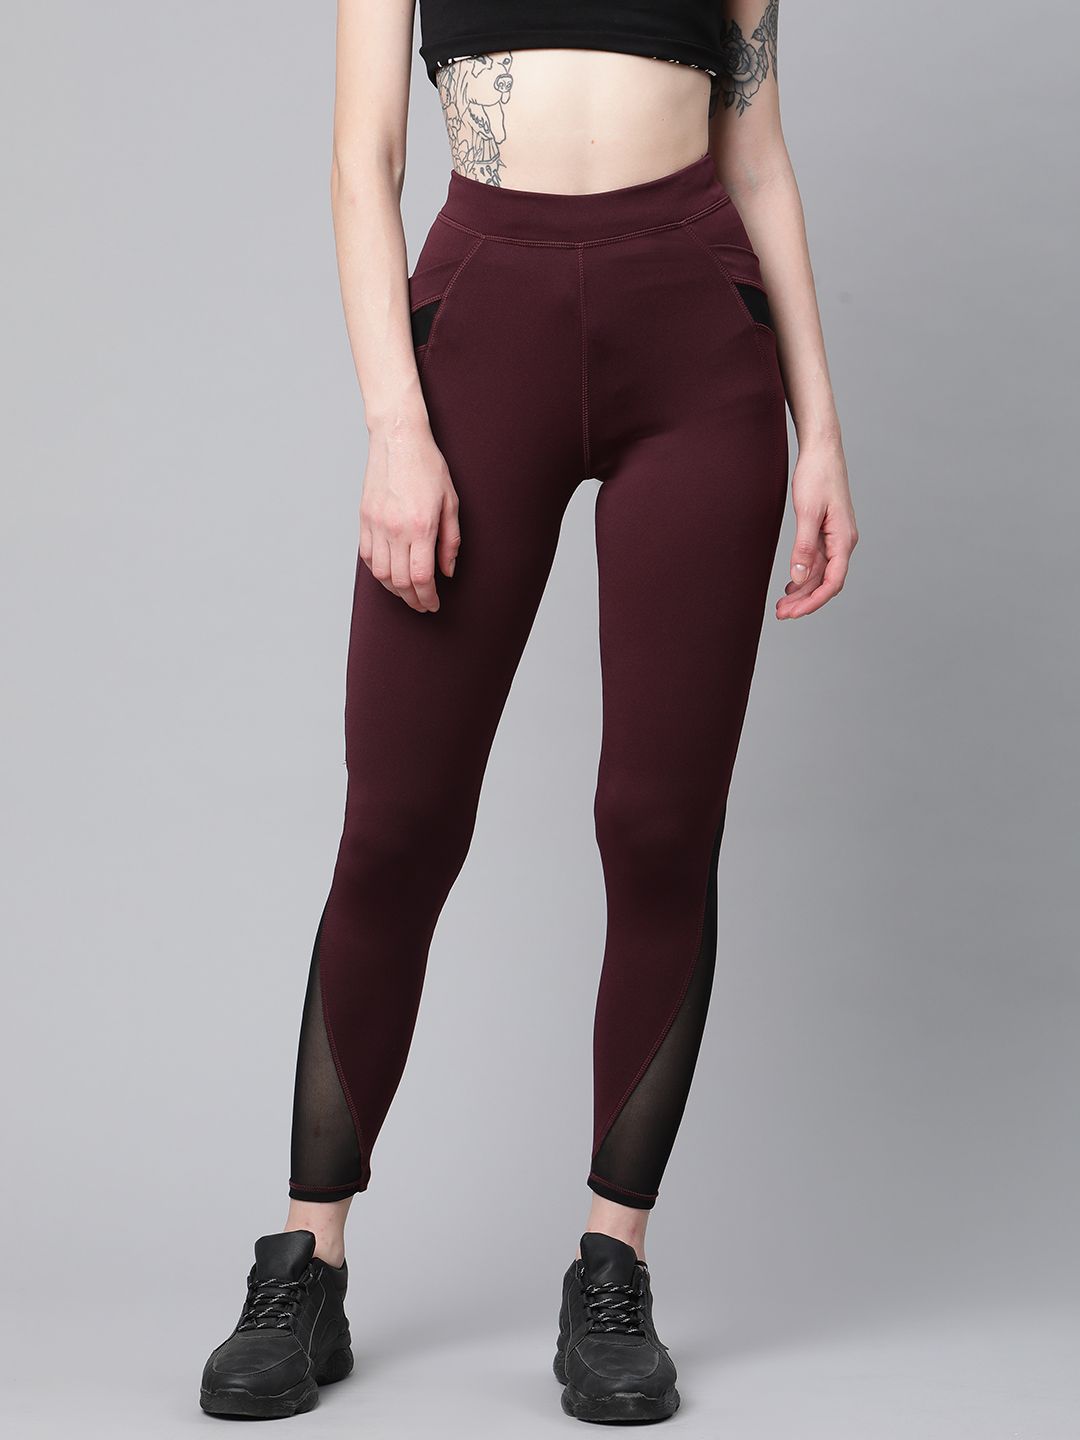 Blinkin Women Burgundy Solid Tights Price in India